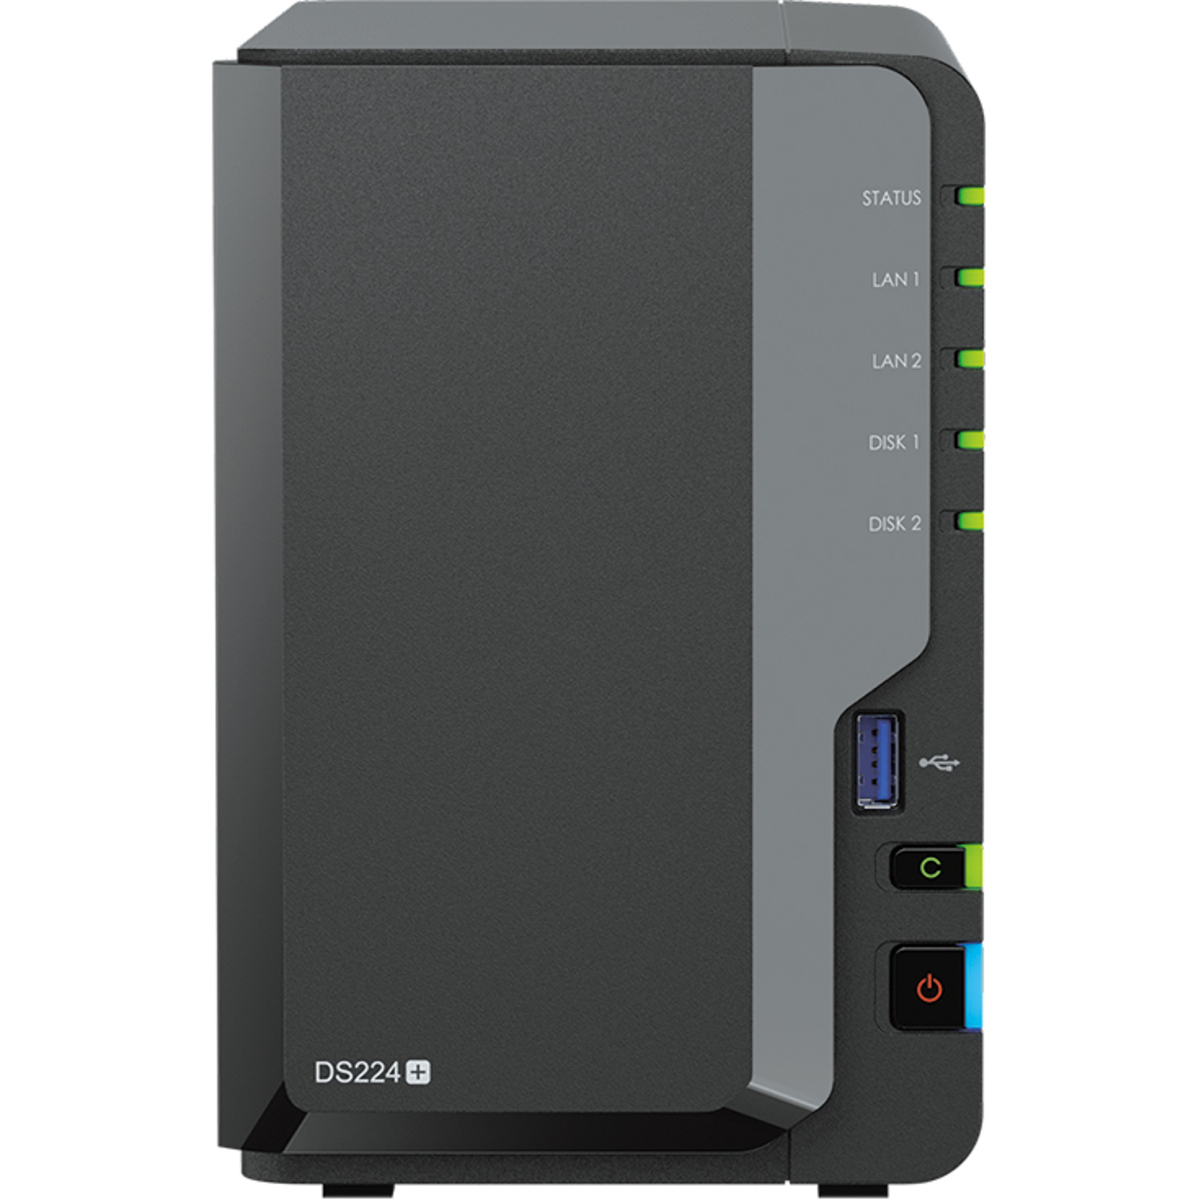 Synology DiskStation DS224+ 16tb 2-Bay Desktop Personal / Basic Home / Small Office NAS - Network Attached Storage Device 1x16tb TeamGroup EX2 Elite T253E2016T0C101 2.5 550/520MB/s SATA 6Gb/s SSD CONSUMER Class Drives Installed - Burn-In Tested - ON SALE - FREE RAM UPGRADE DiskStation DS224+